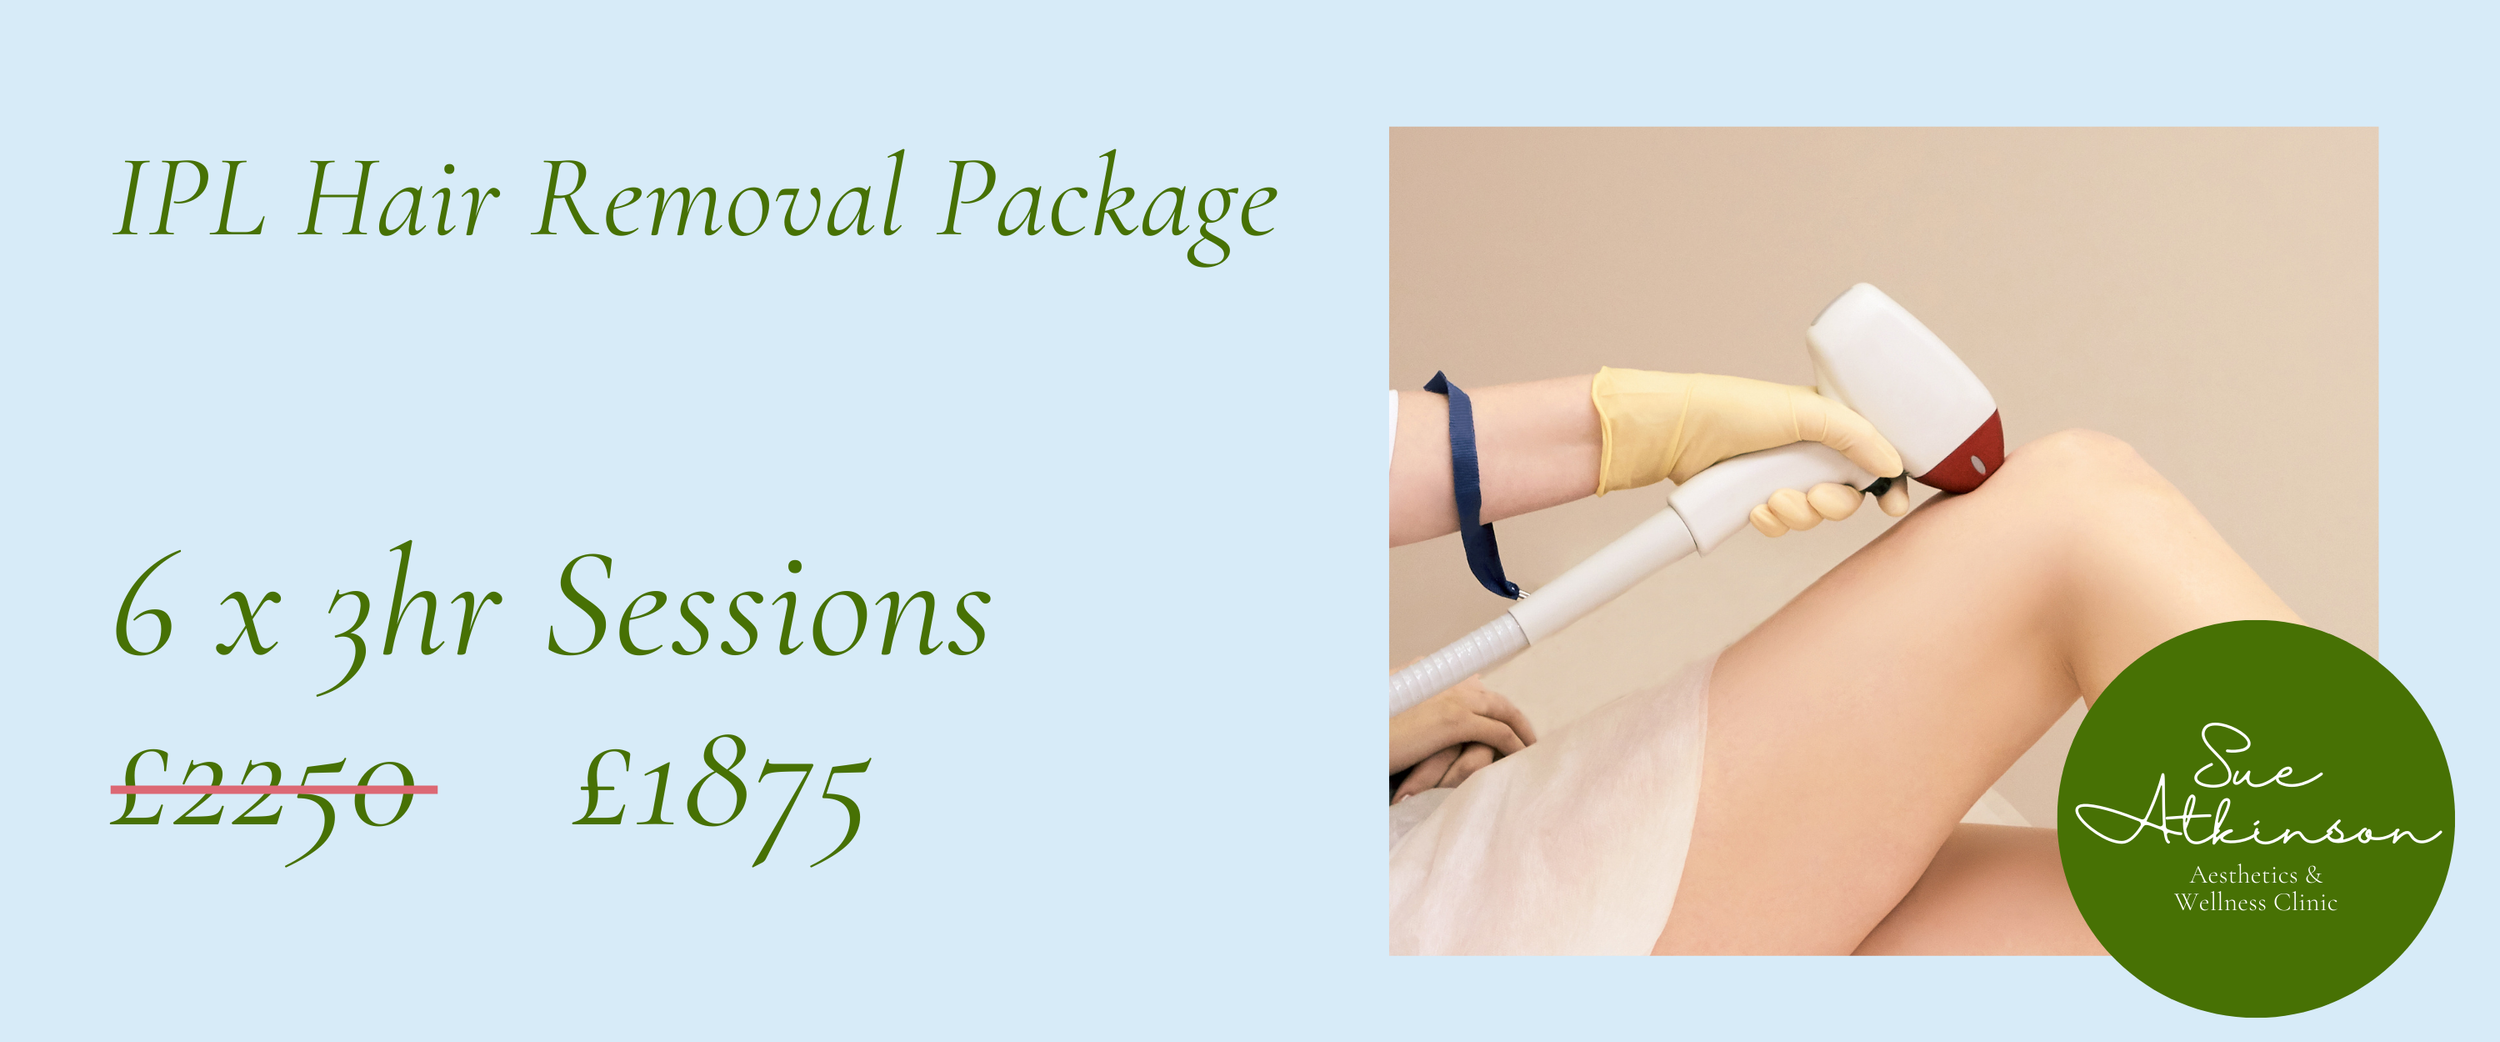 SA-Package-IPLHairRemoval-3hrs.png